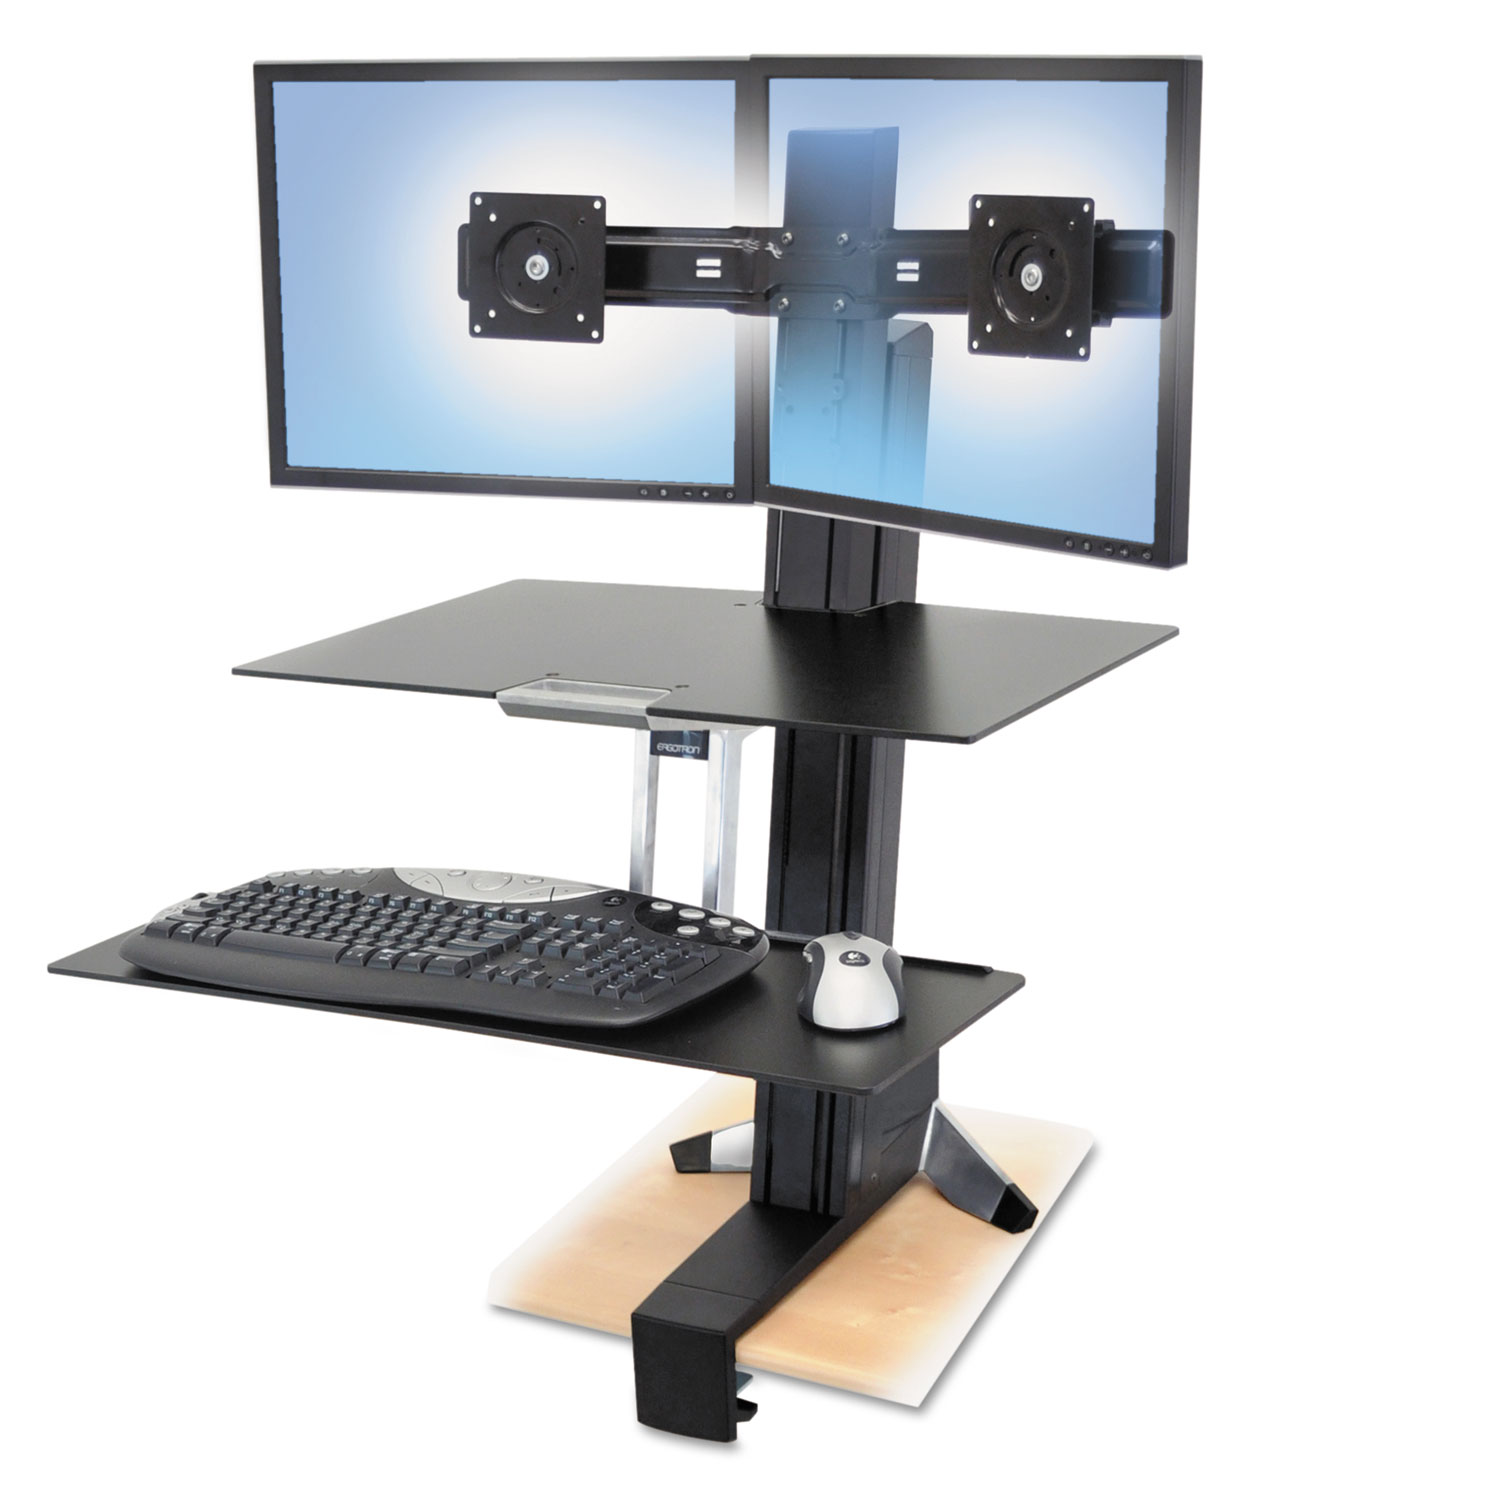  WorkFit by Ergotron 33-349-200 WorkFit-S Sit-Stand Workstation with Worksurface, Dual LCD Monitors, 27w x 15d x 29.5h, Aluminum/Black (ERG33349200) 